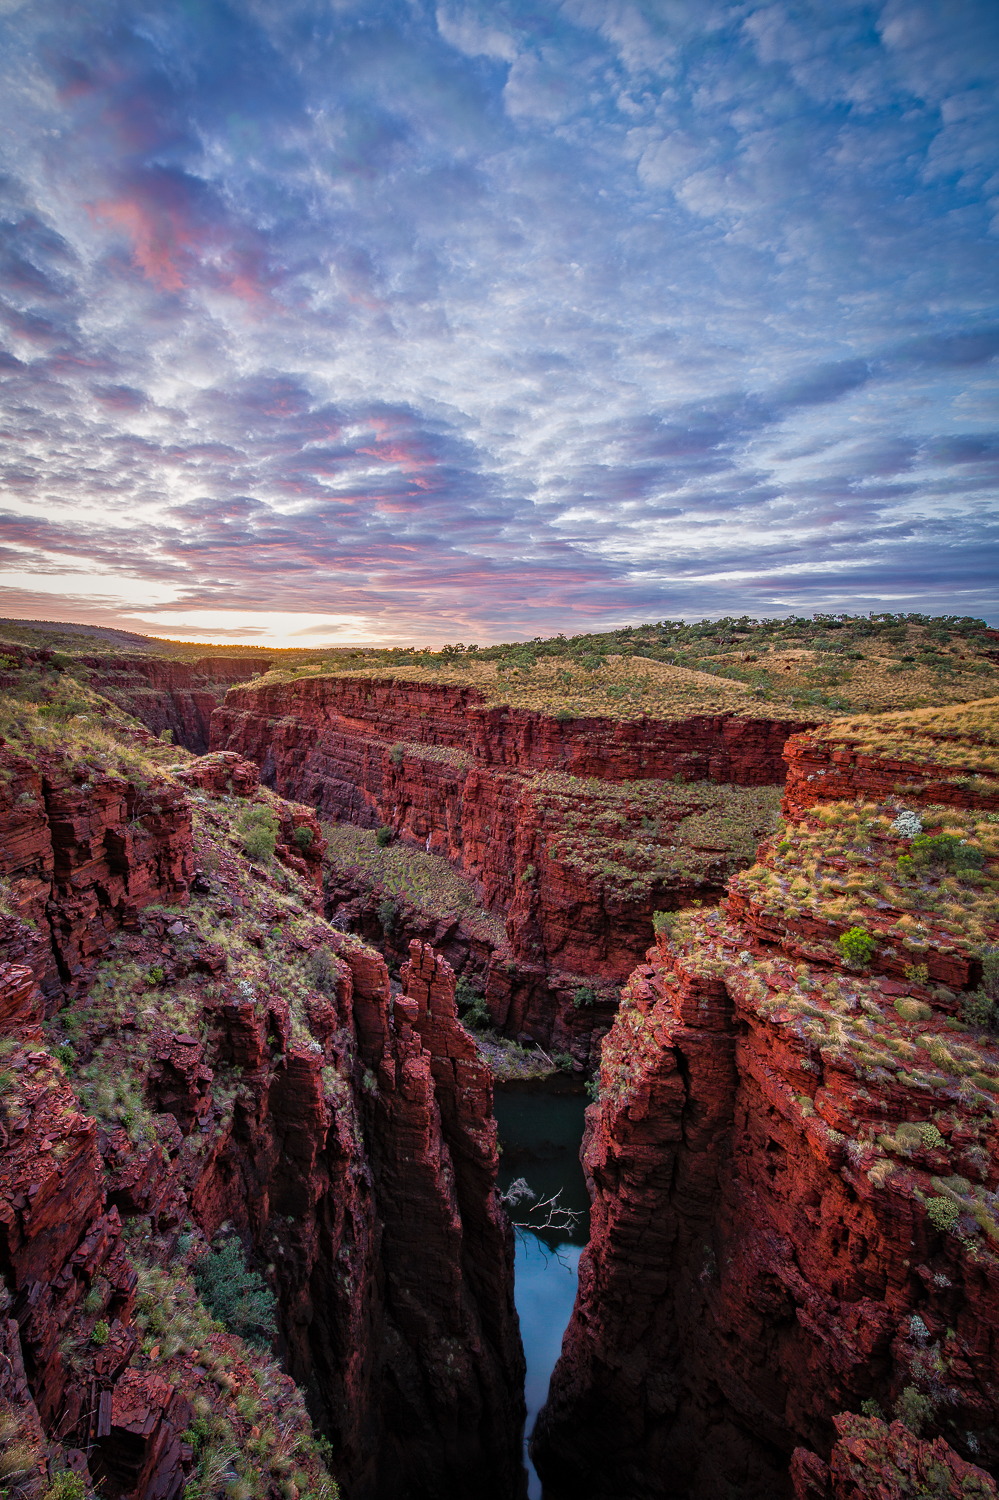 Epic Sunrise over the Red Canyons of Karijini National Park in Western Australia